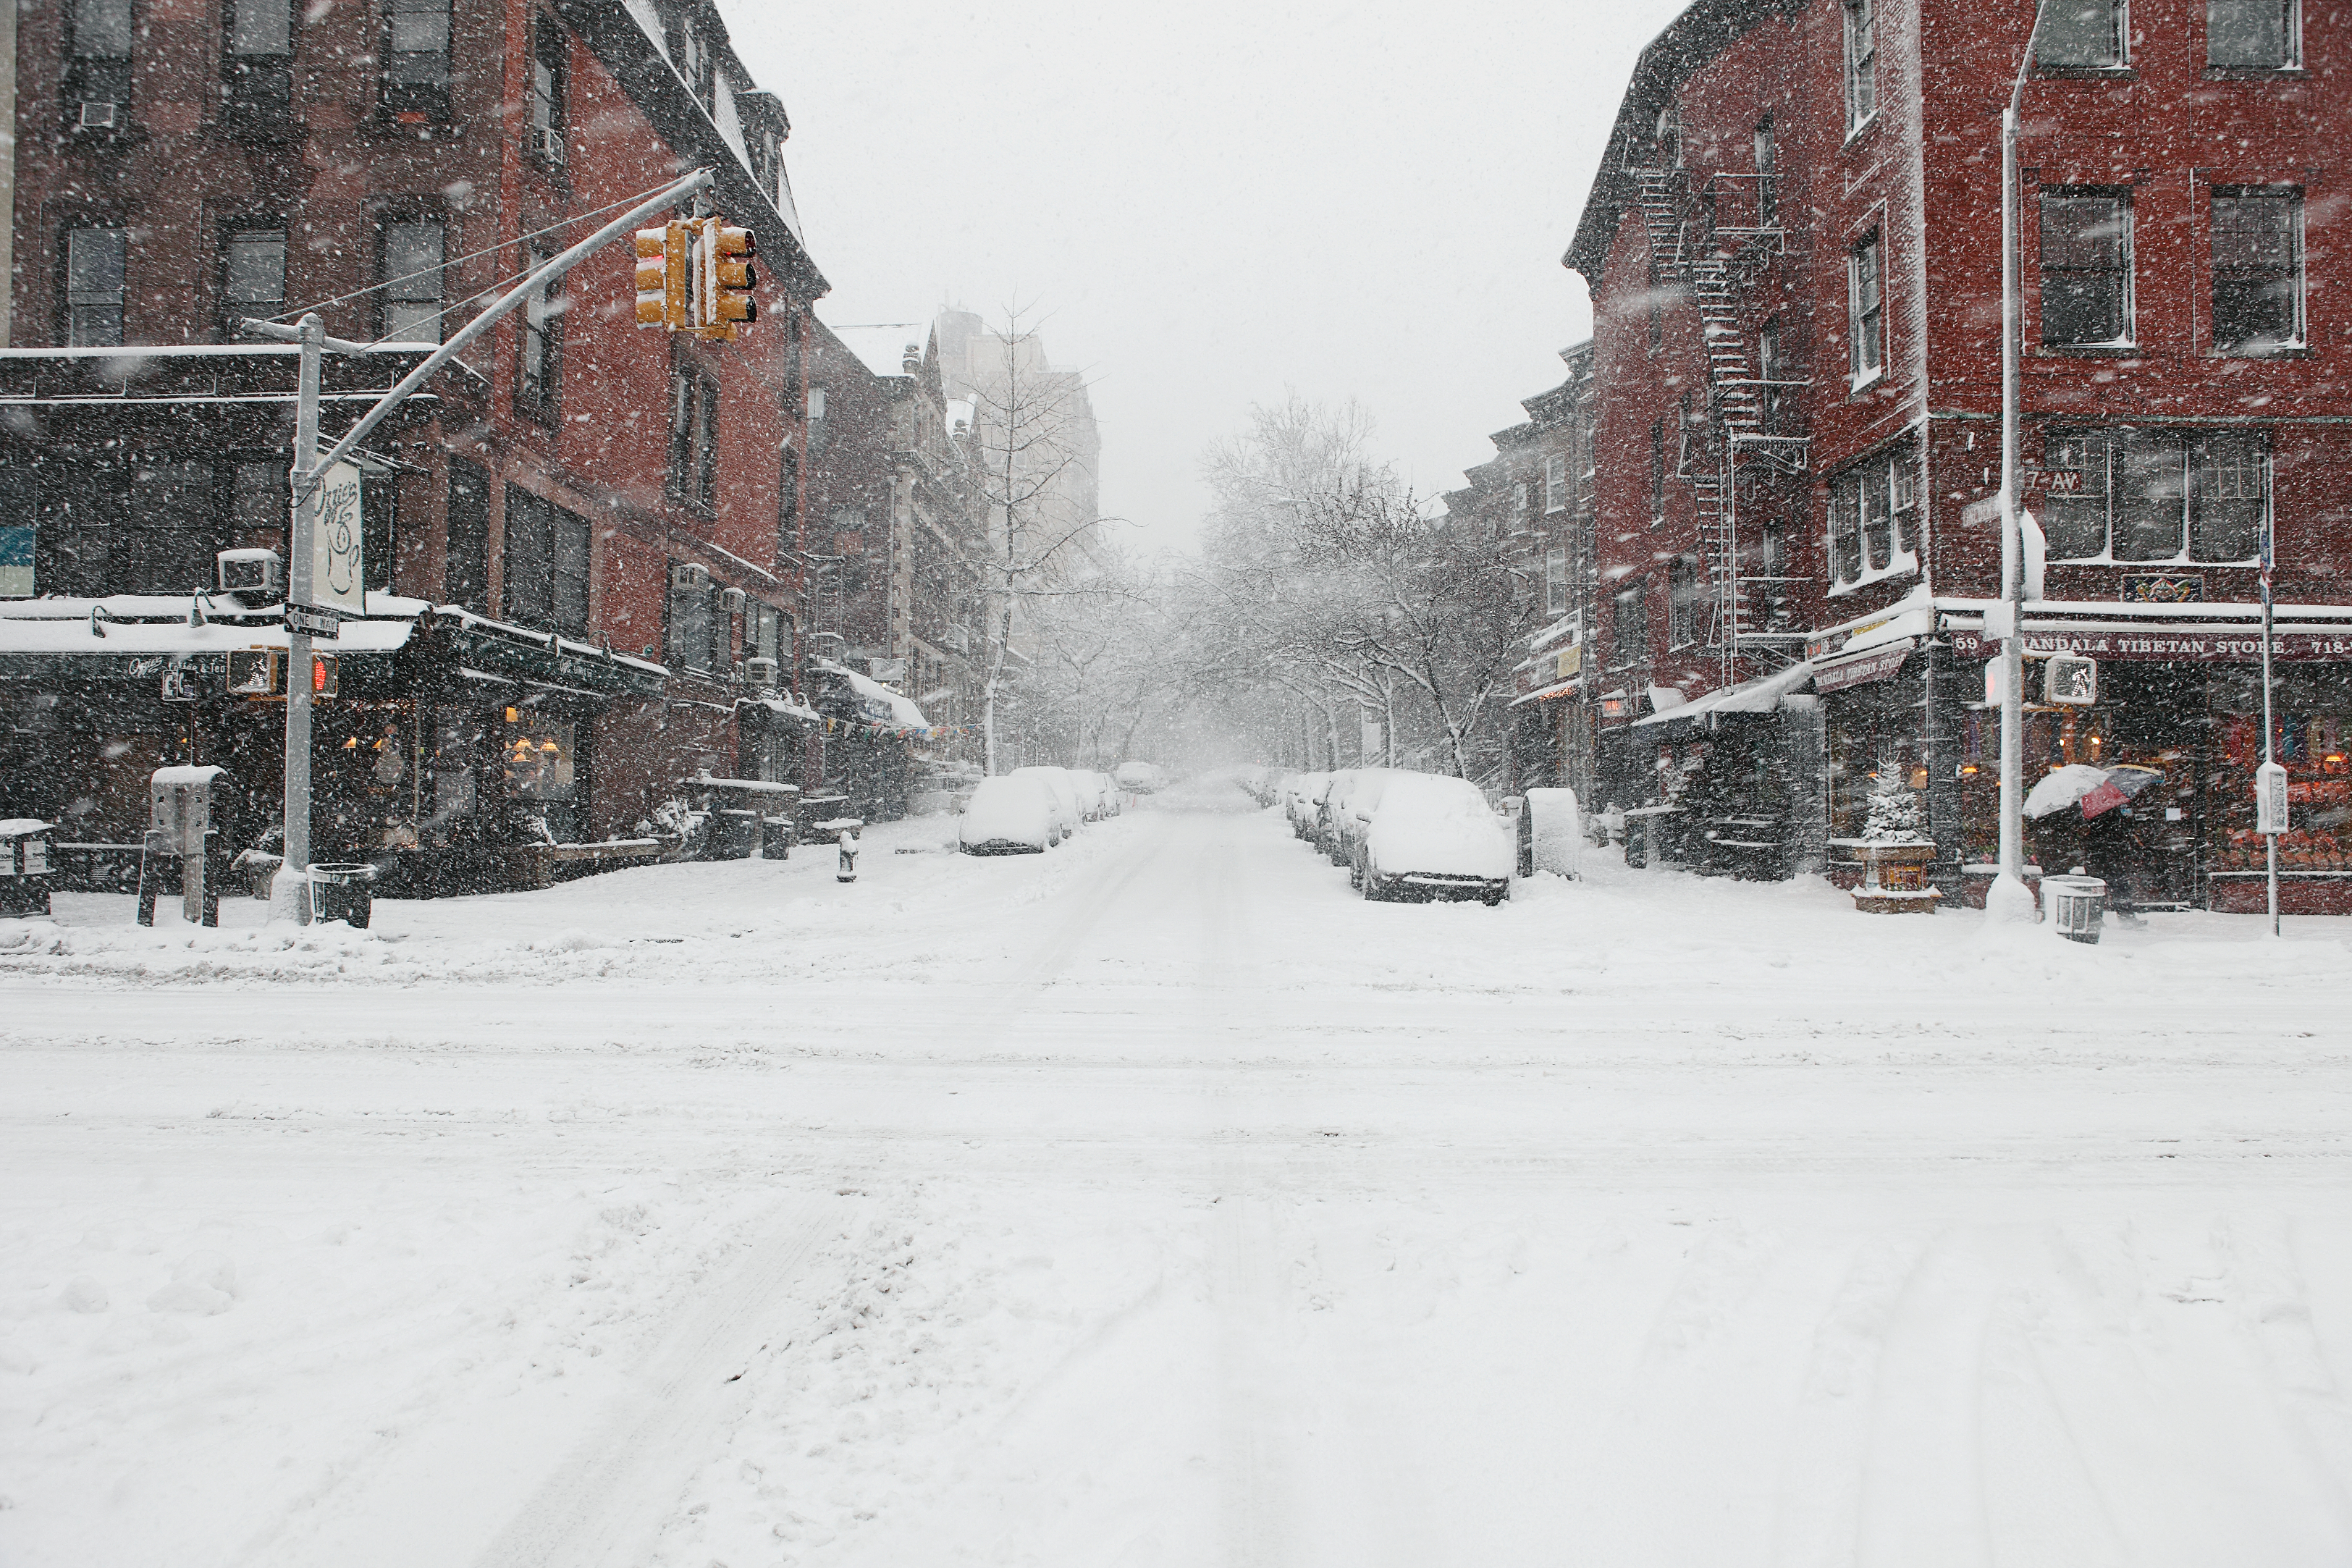 Snow-covered street with buildings on both sides, traffic lights, and no visible persons